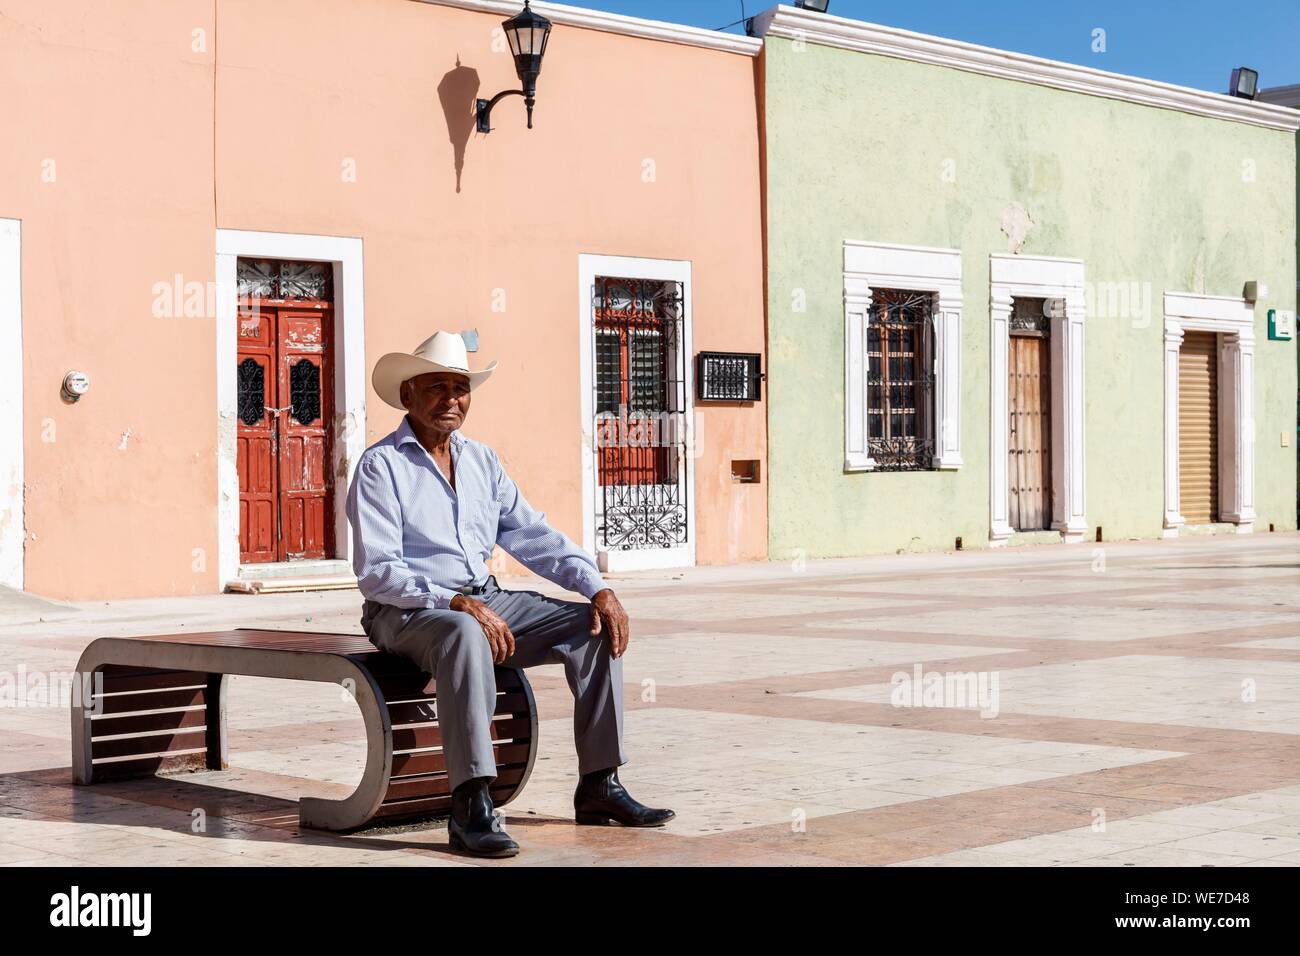 Mexico, Campeche state, Campeche, fortified city listed as World Heritage by UNESCO, a man with a hat sitting before colonial houses Stock Photo